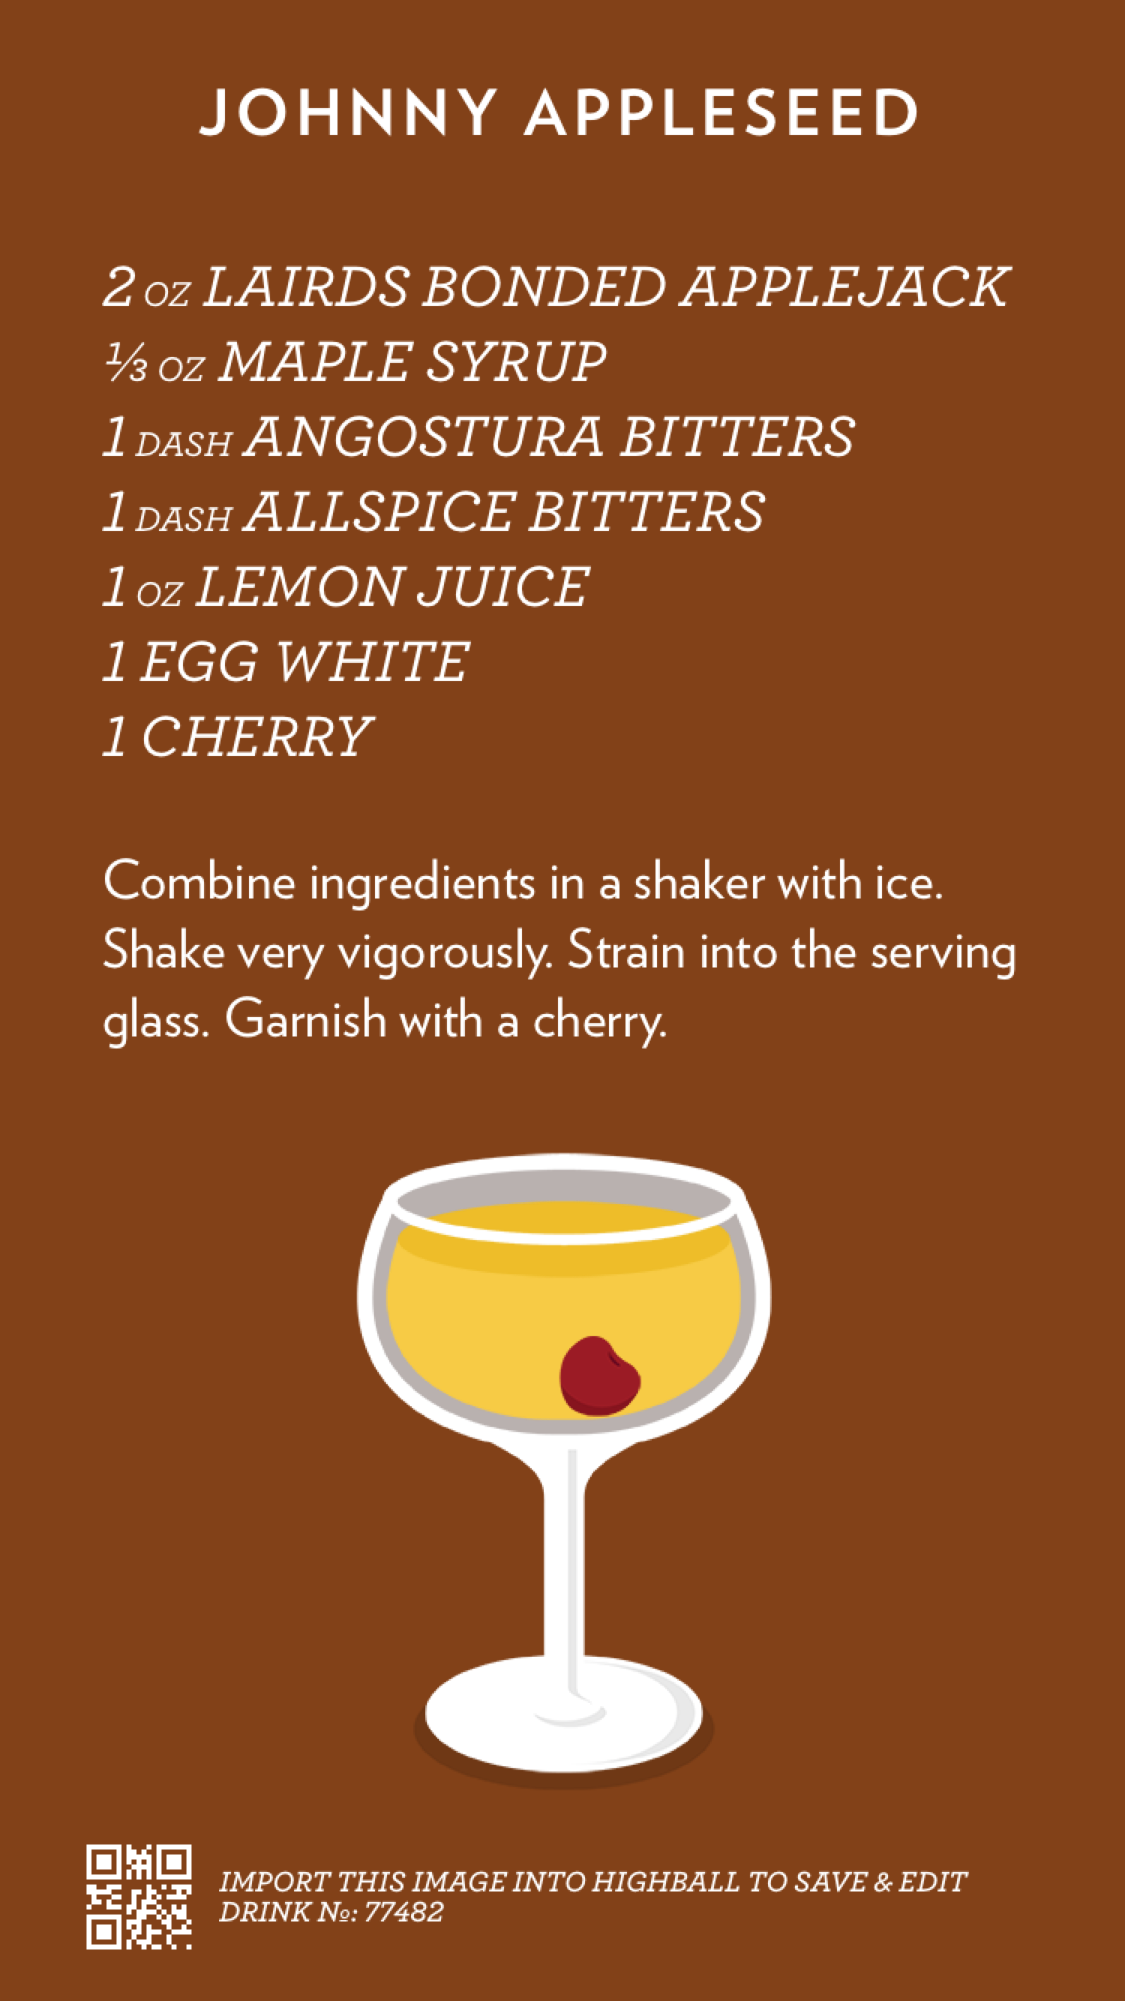 Recipe for Johnny Appleseed